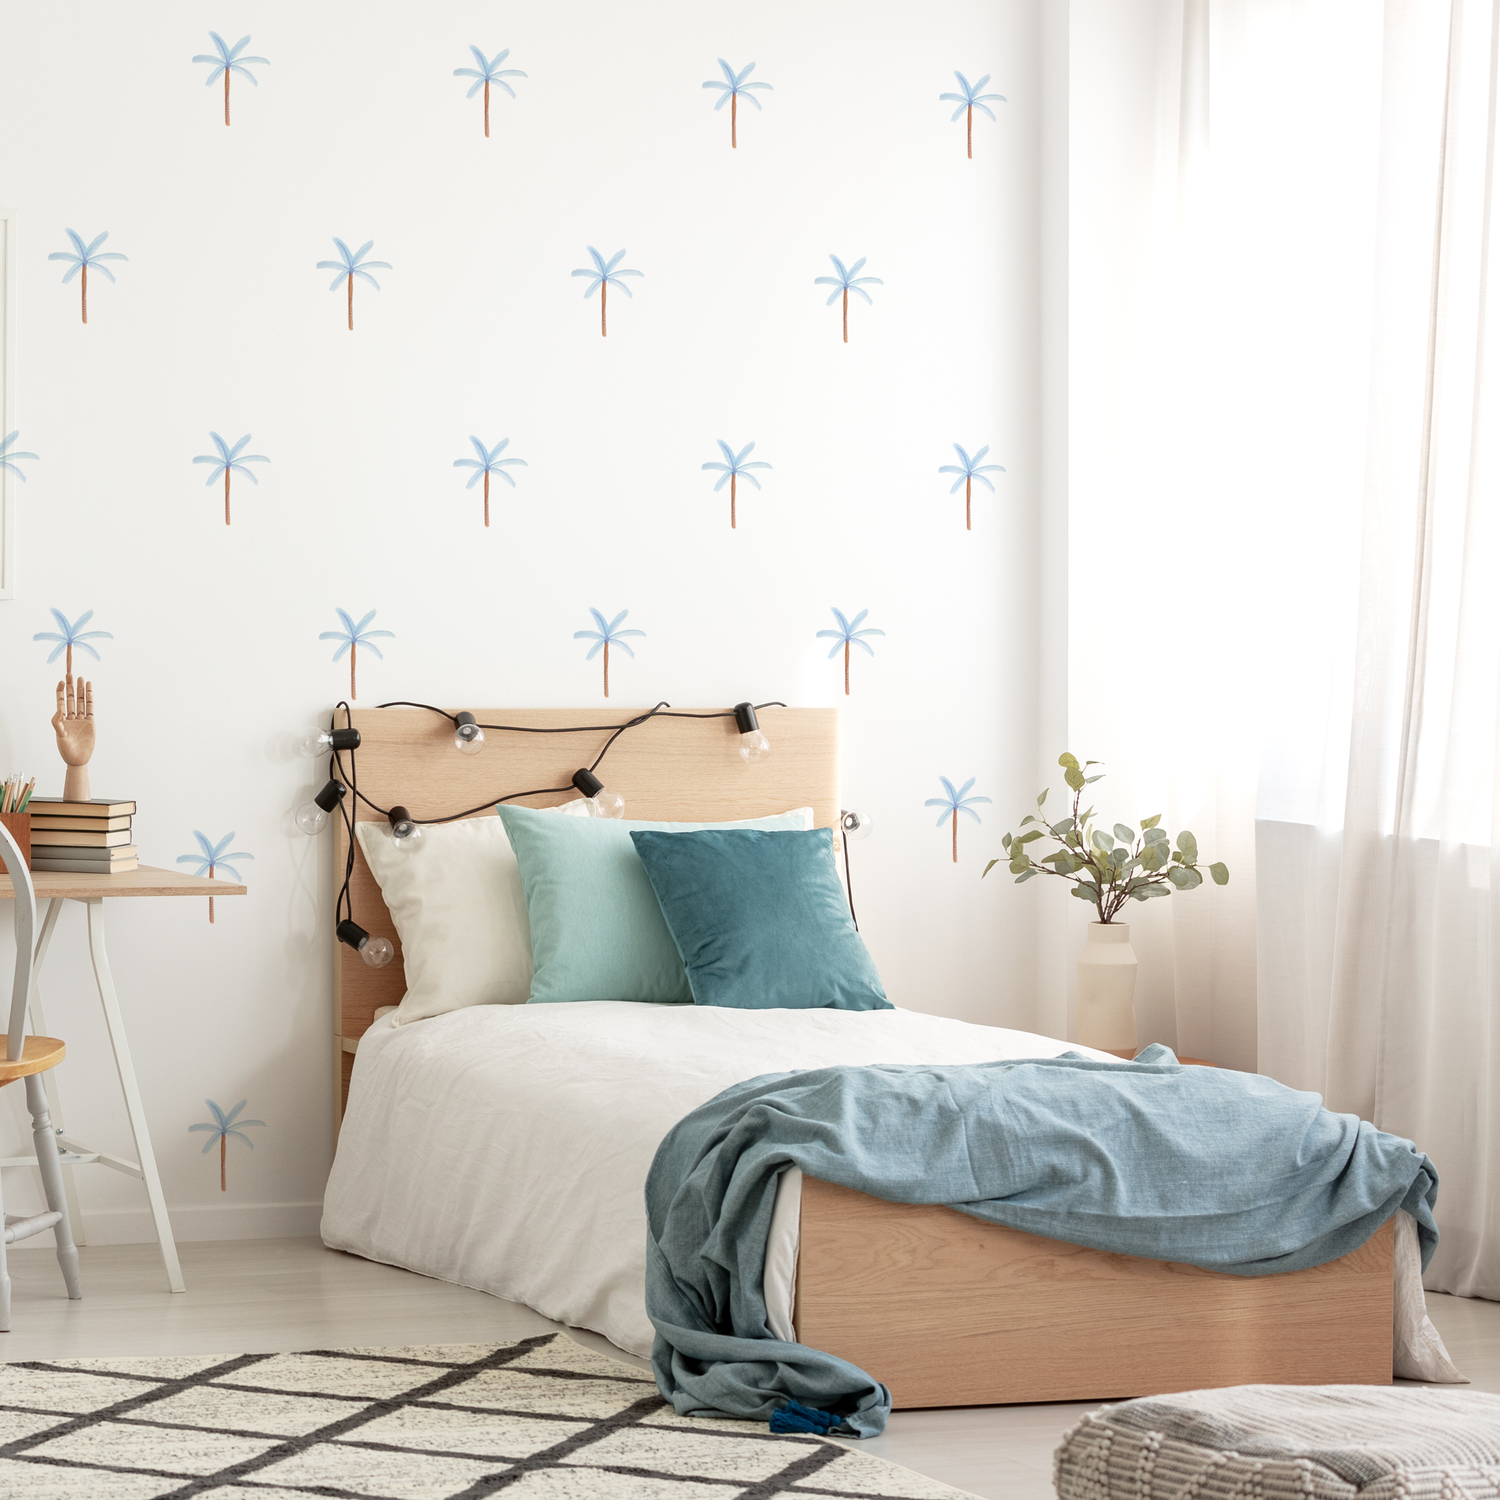 Blue Palm Tree Fabric Wall Decals - A Creative Hart